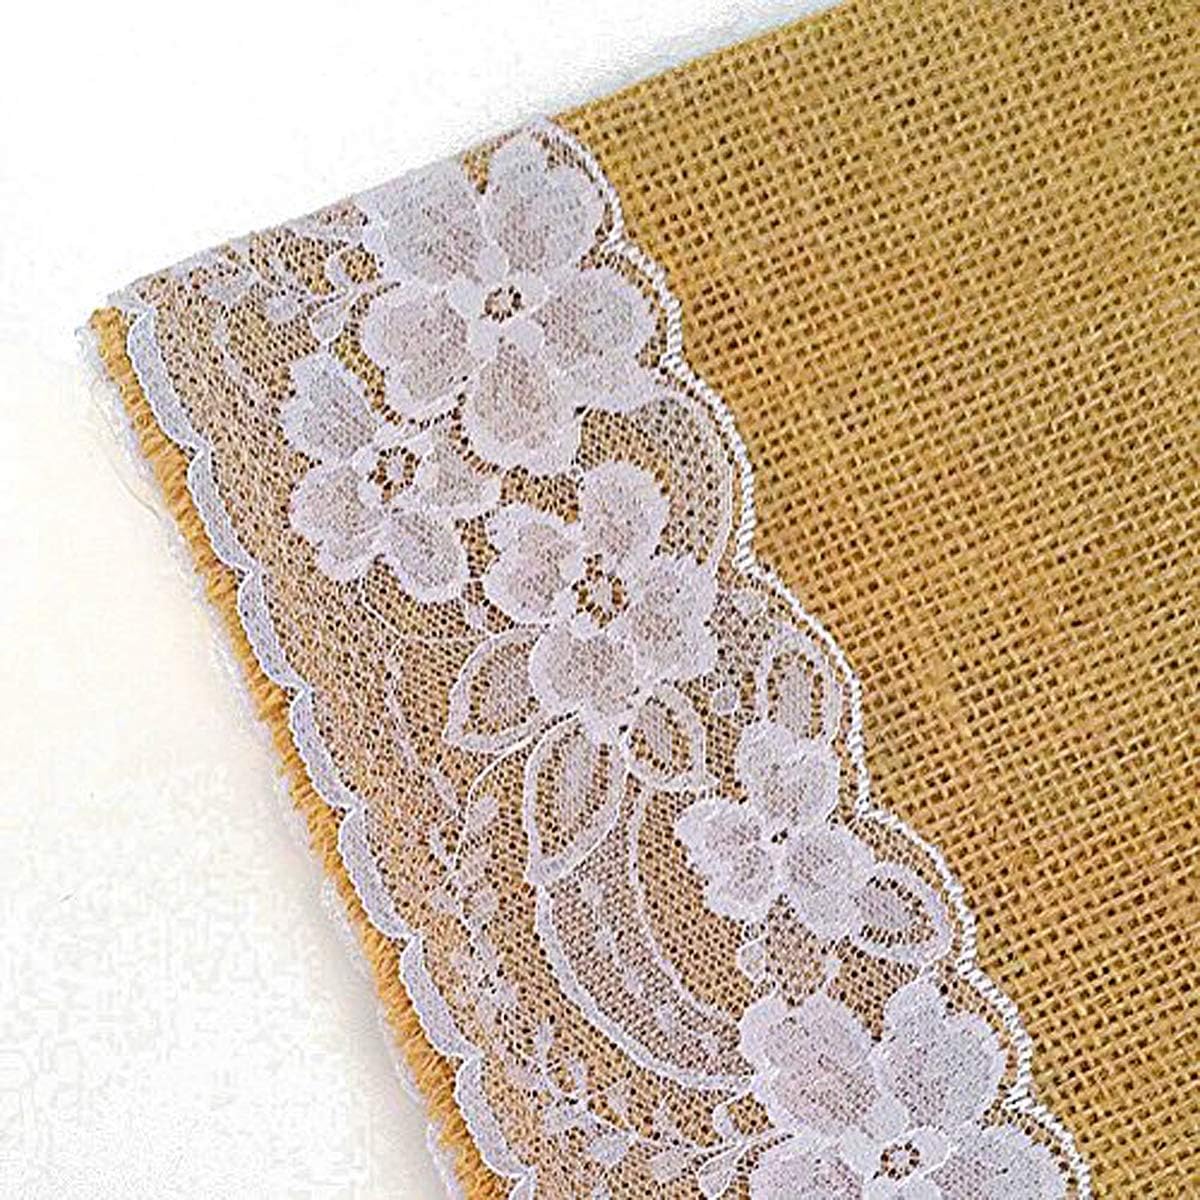 Burlap Table Runner 14&quot; x 108&quot; | Burlap Roll Lace Runner Perfect for Rustic Weddings and Events (White Lace in The Middle)